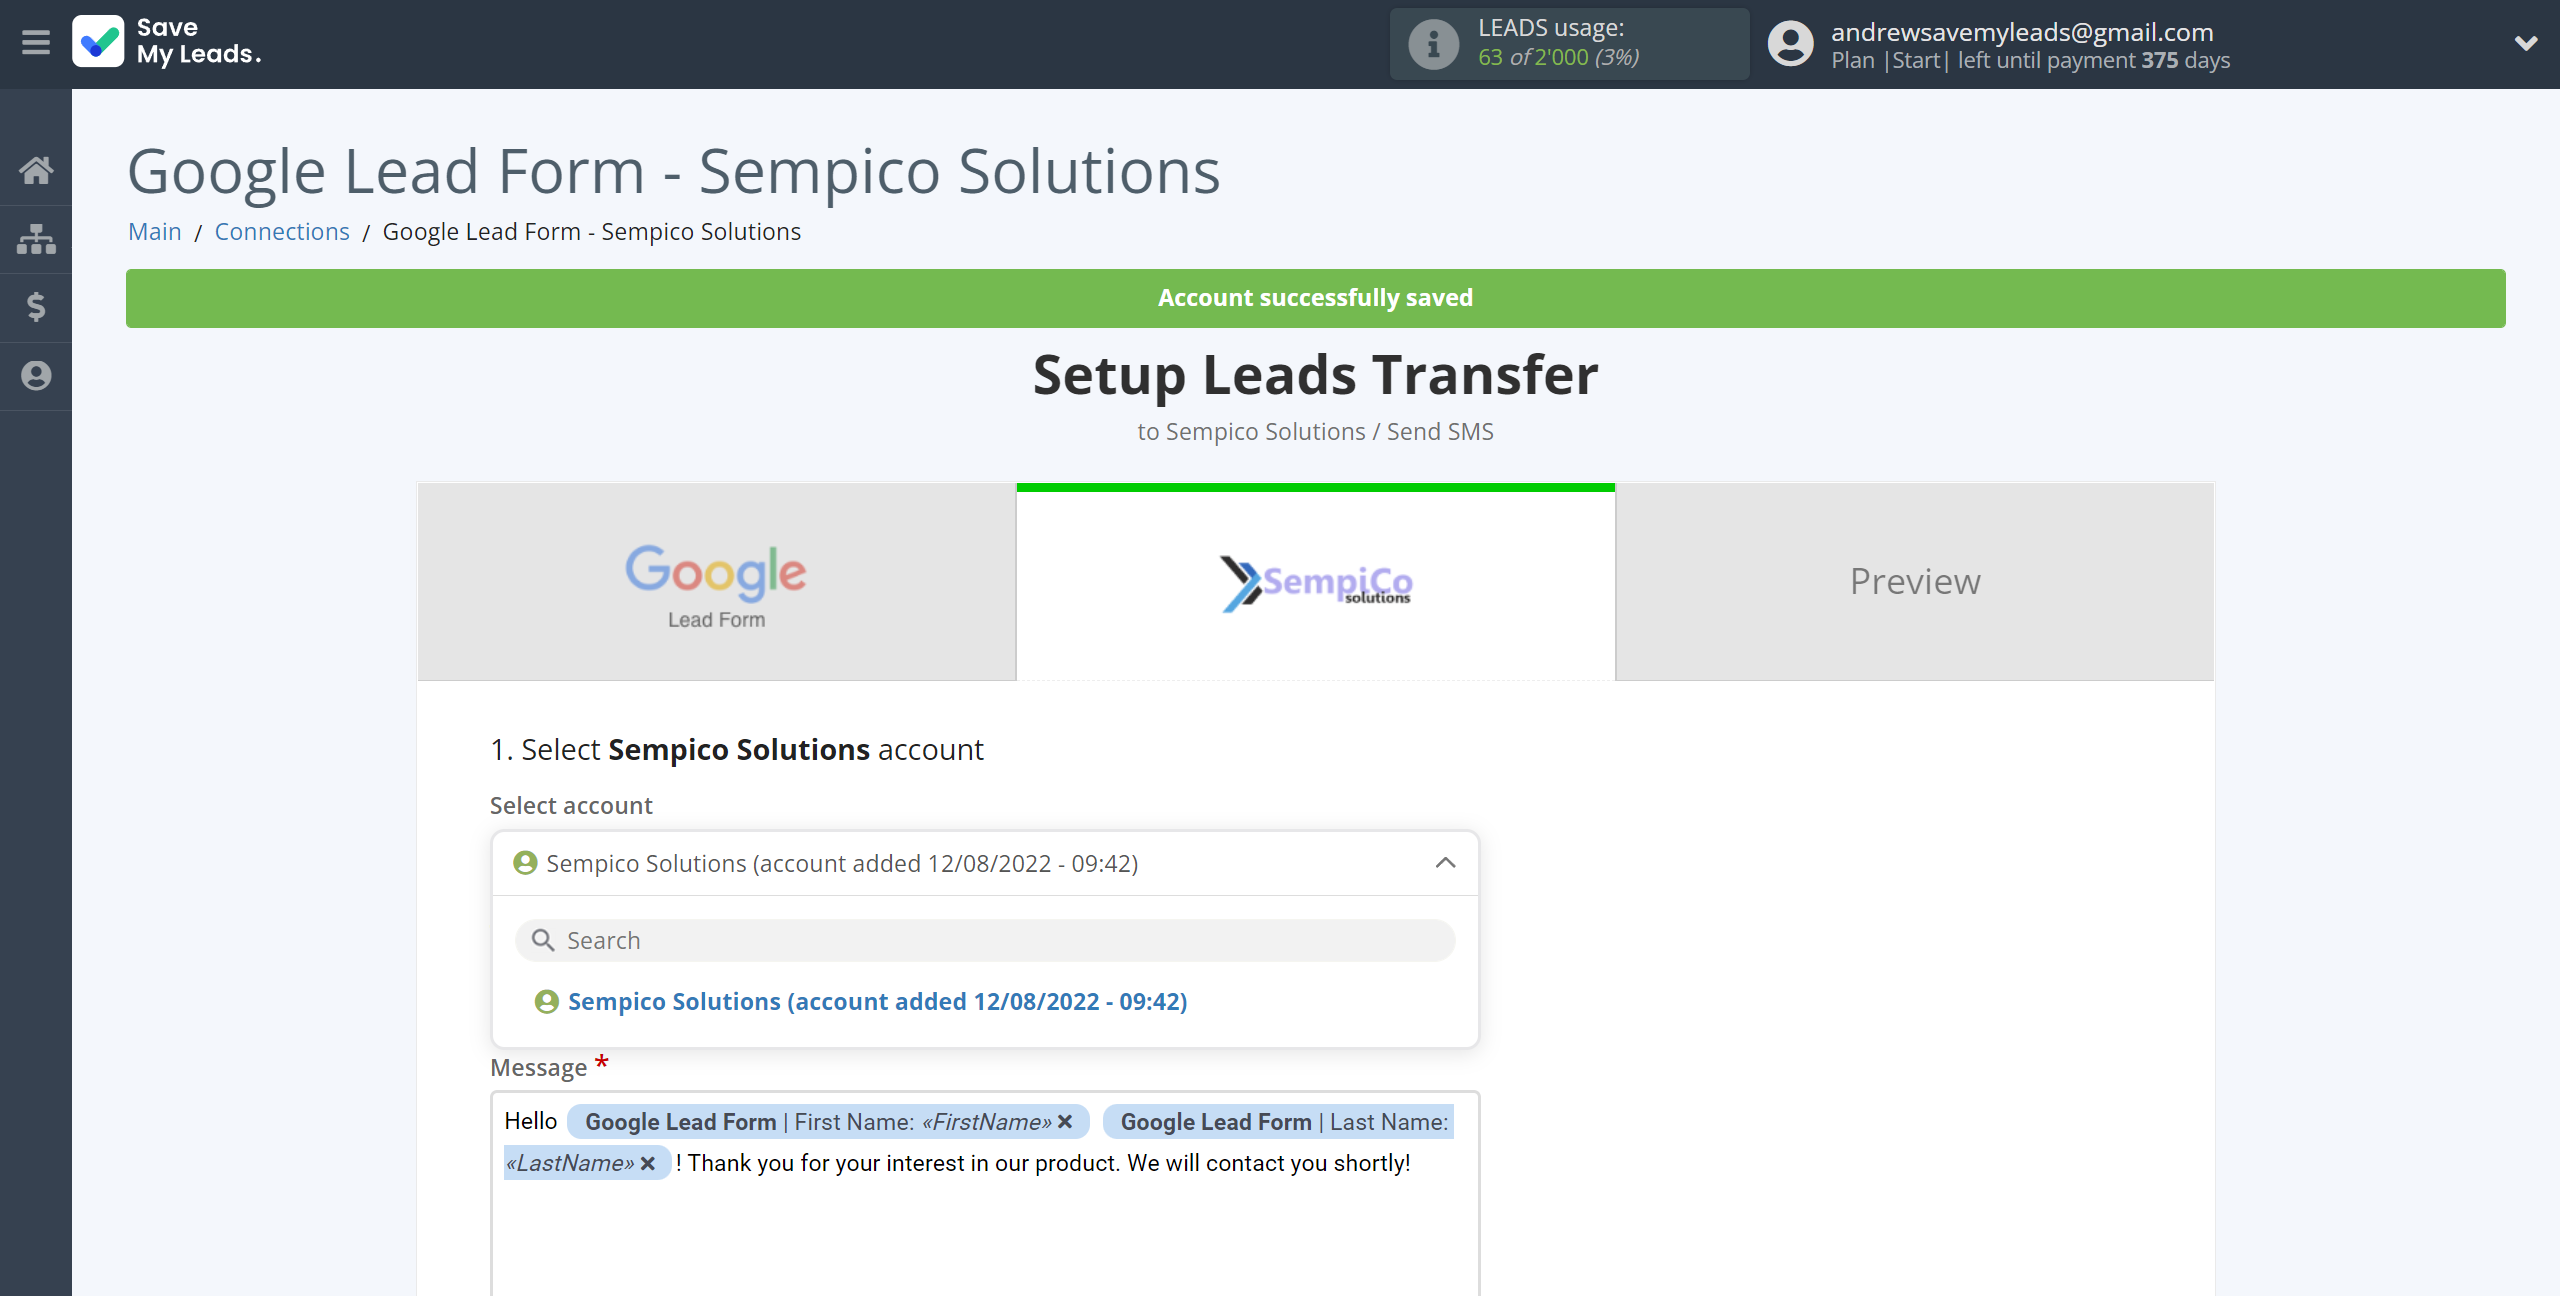 How to Connect Google Lead Form with Sempico Solutions | Data Destination account selection